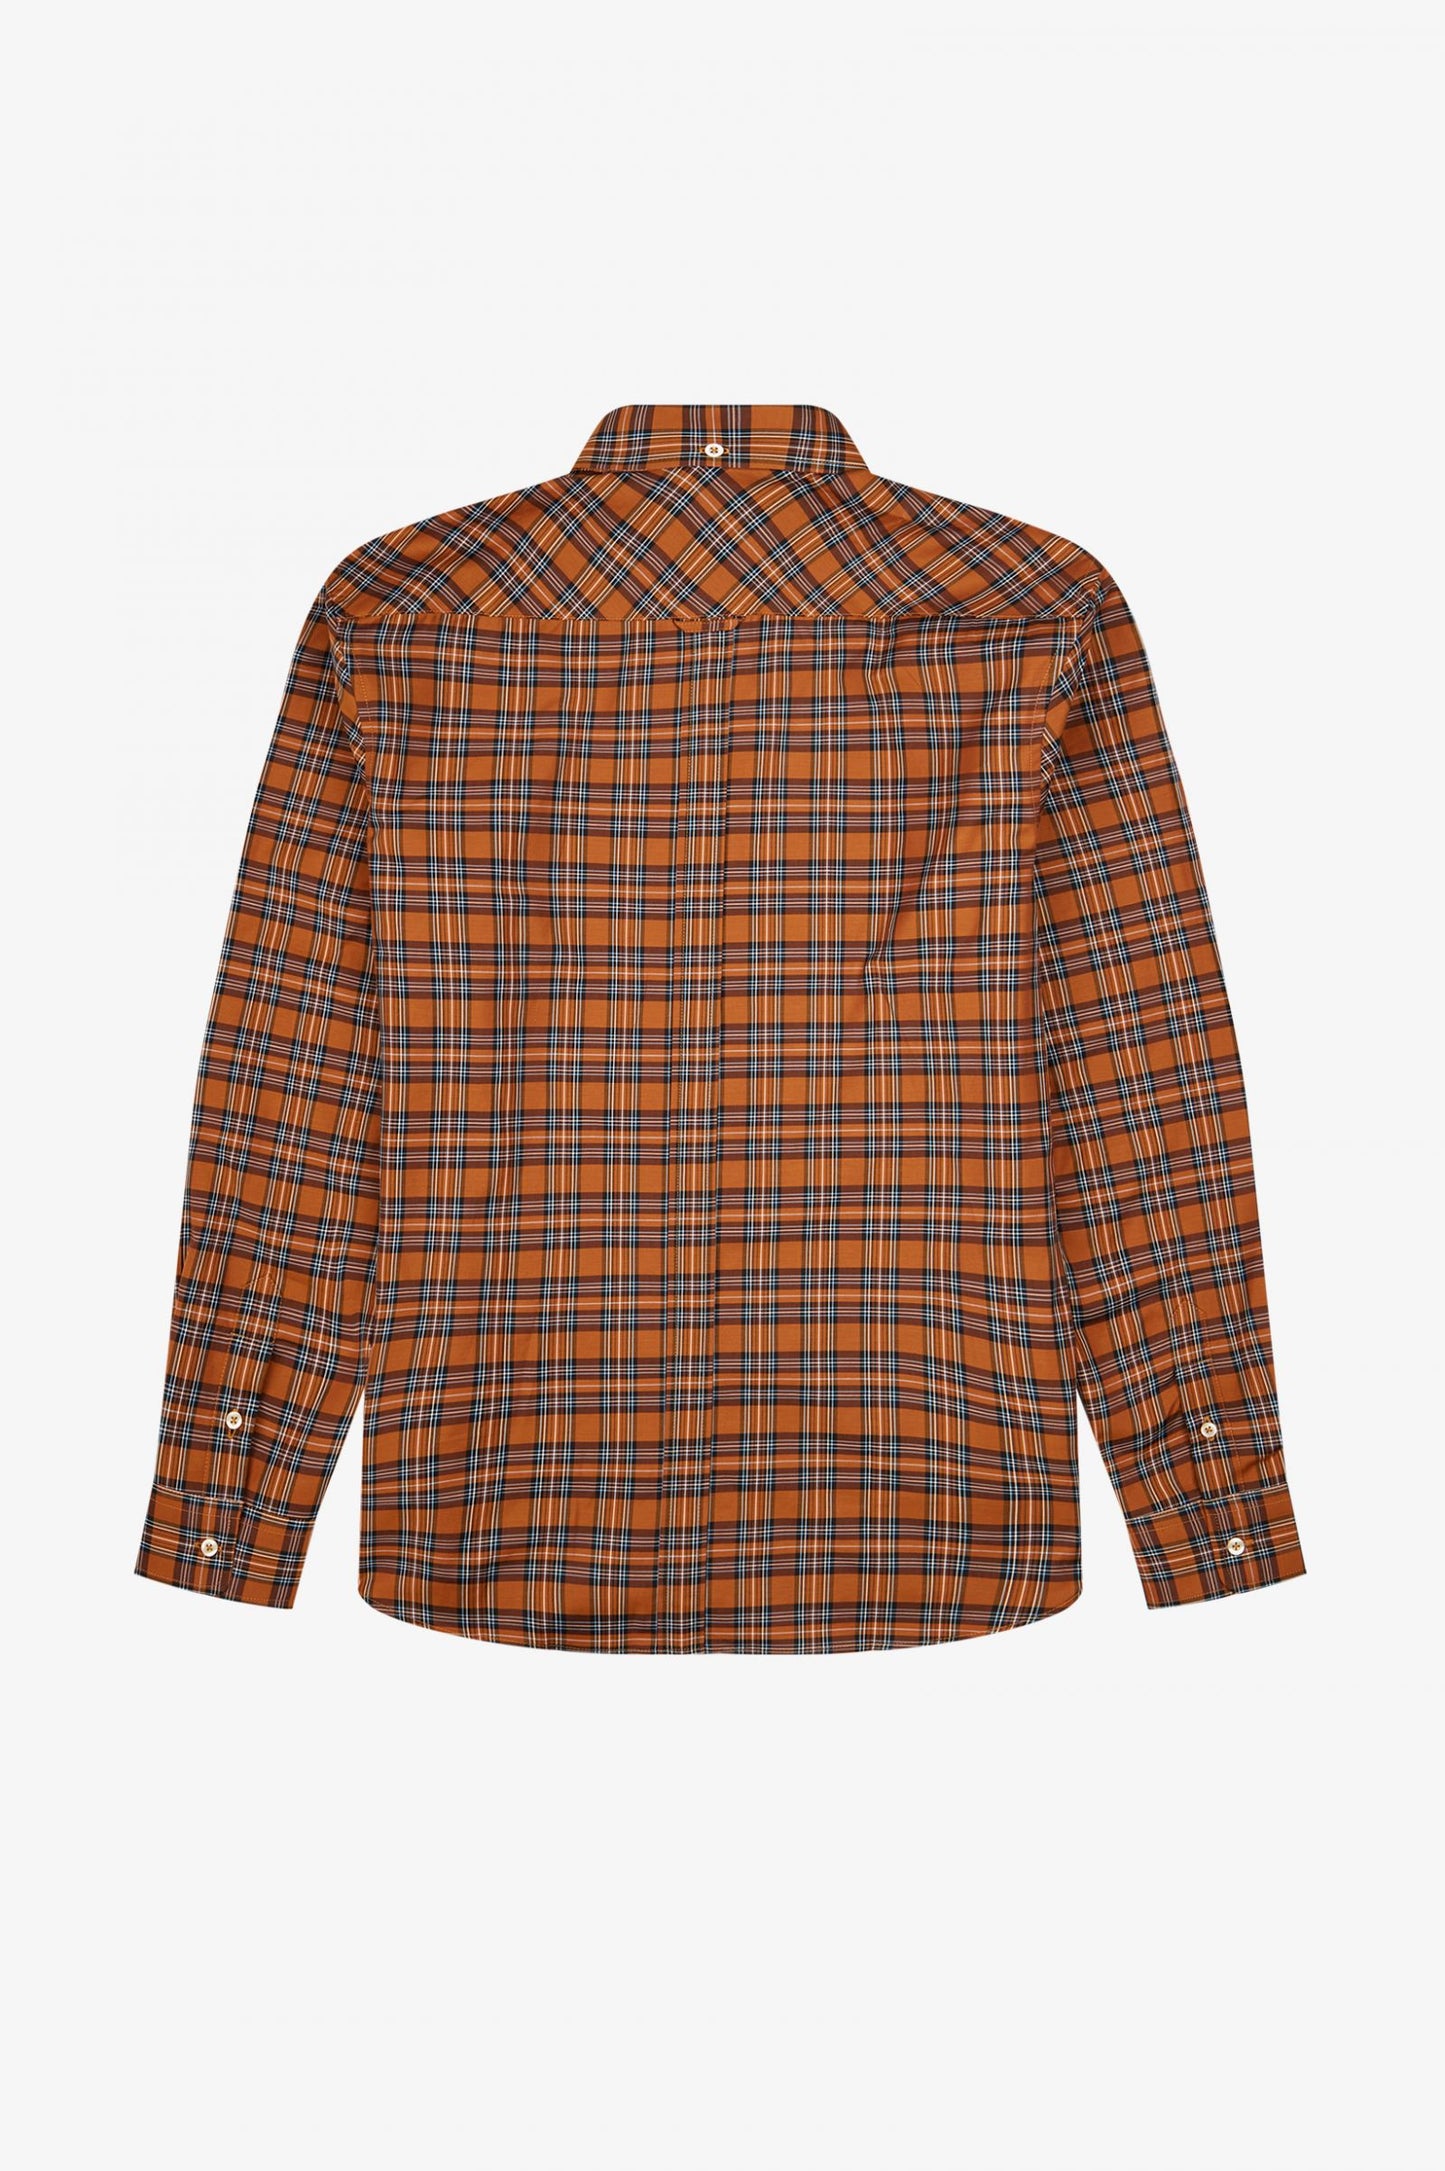 MADE IN ENGLAND Fred Perry Tartan Shirt